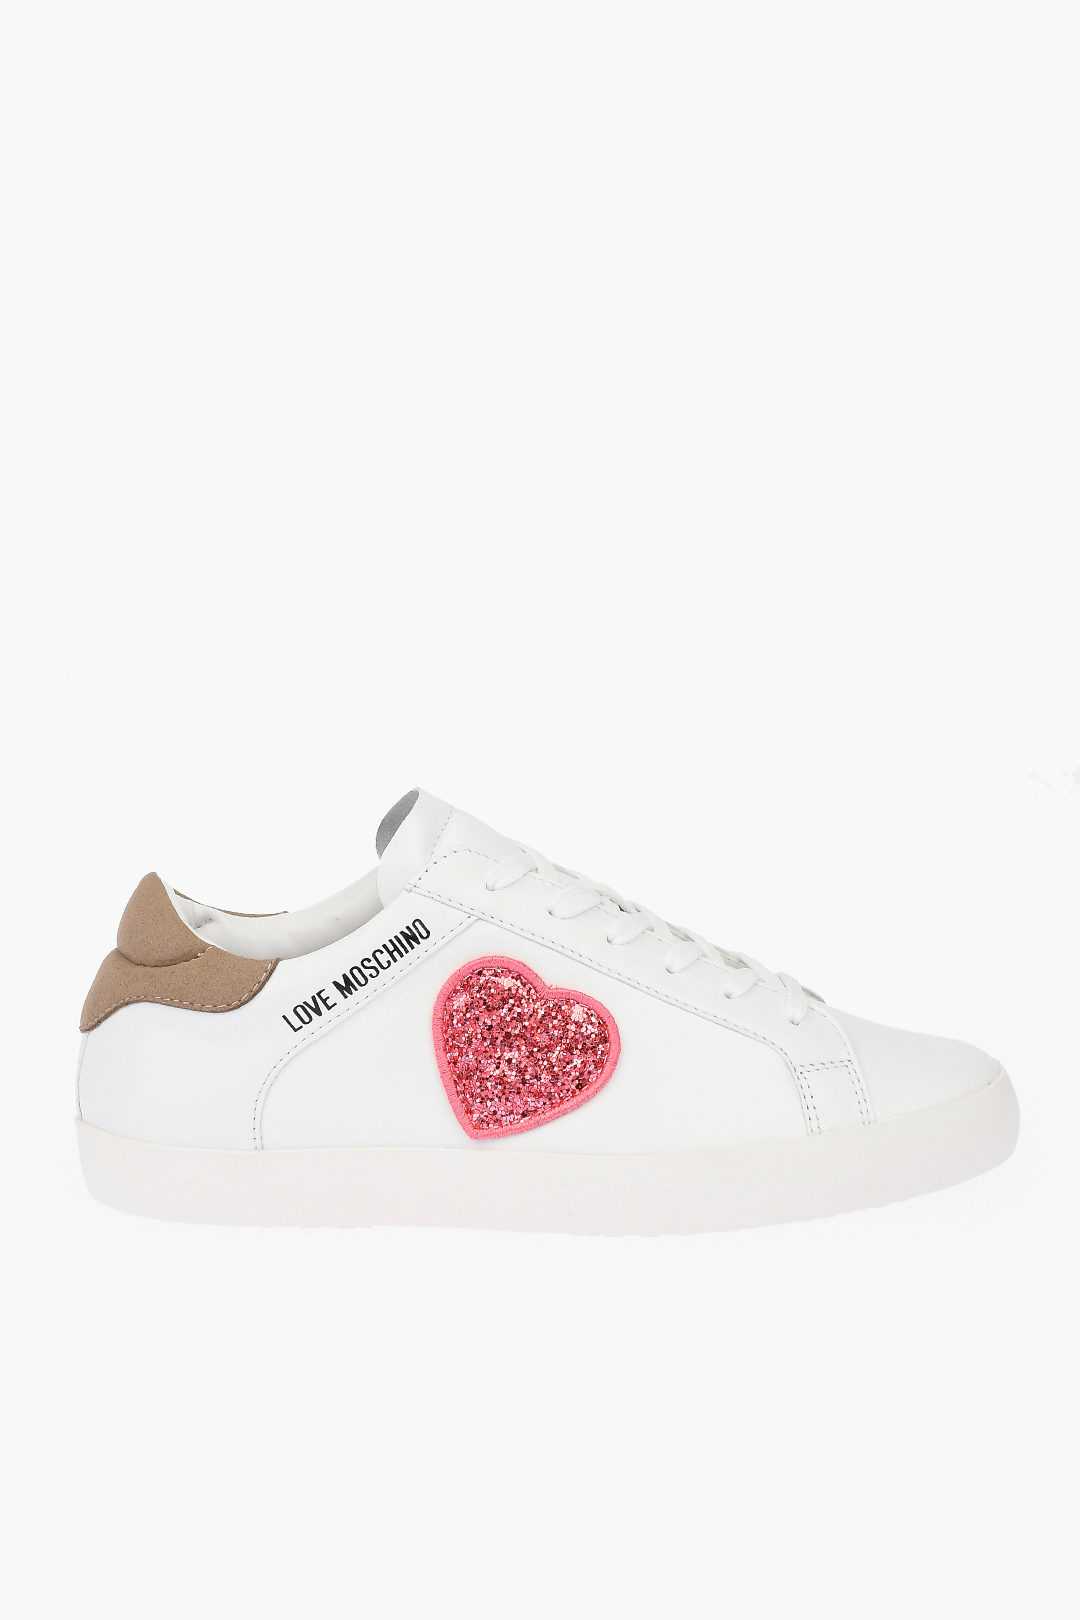 Moschino LOVE leather low top sneakers with glitter women - Glamood Outlet